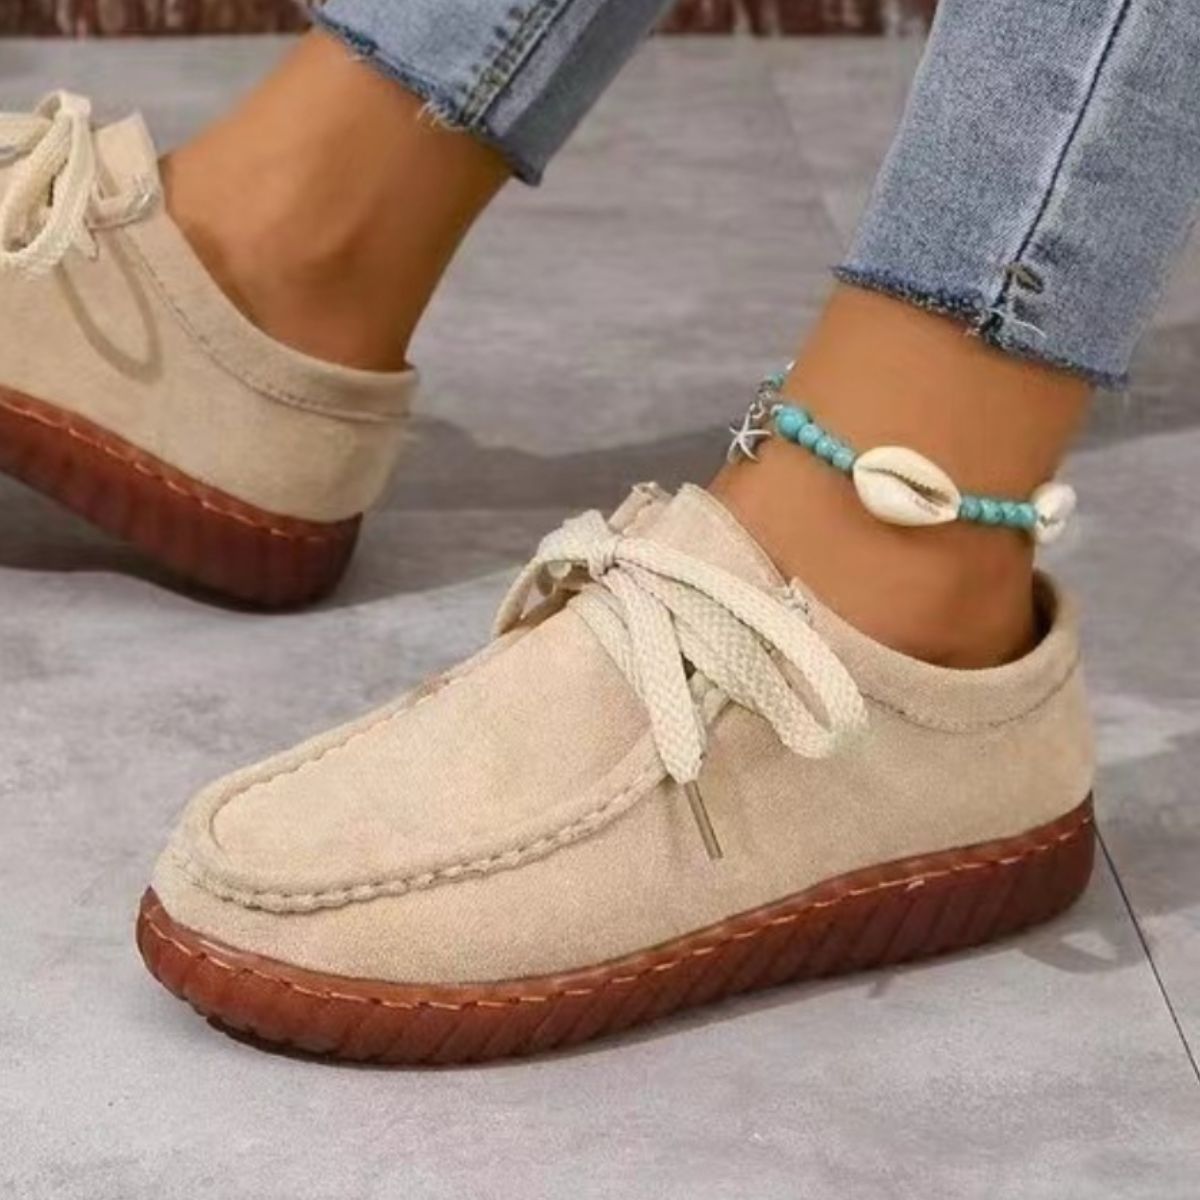 Tied Suede Round Toe Sneakers (3 Colors)